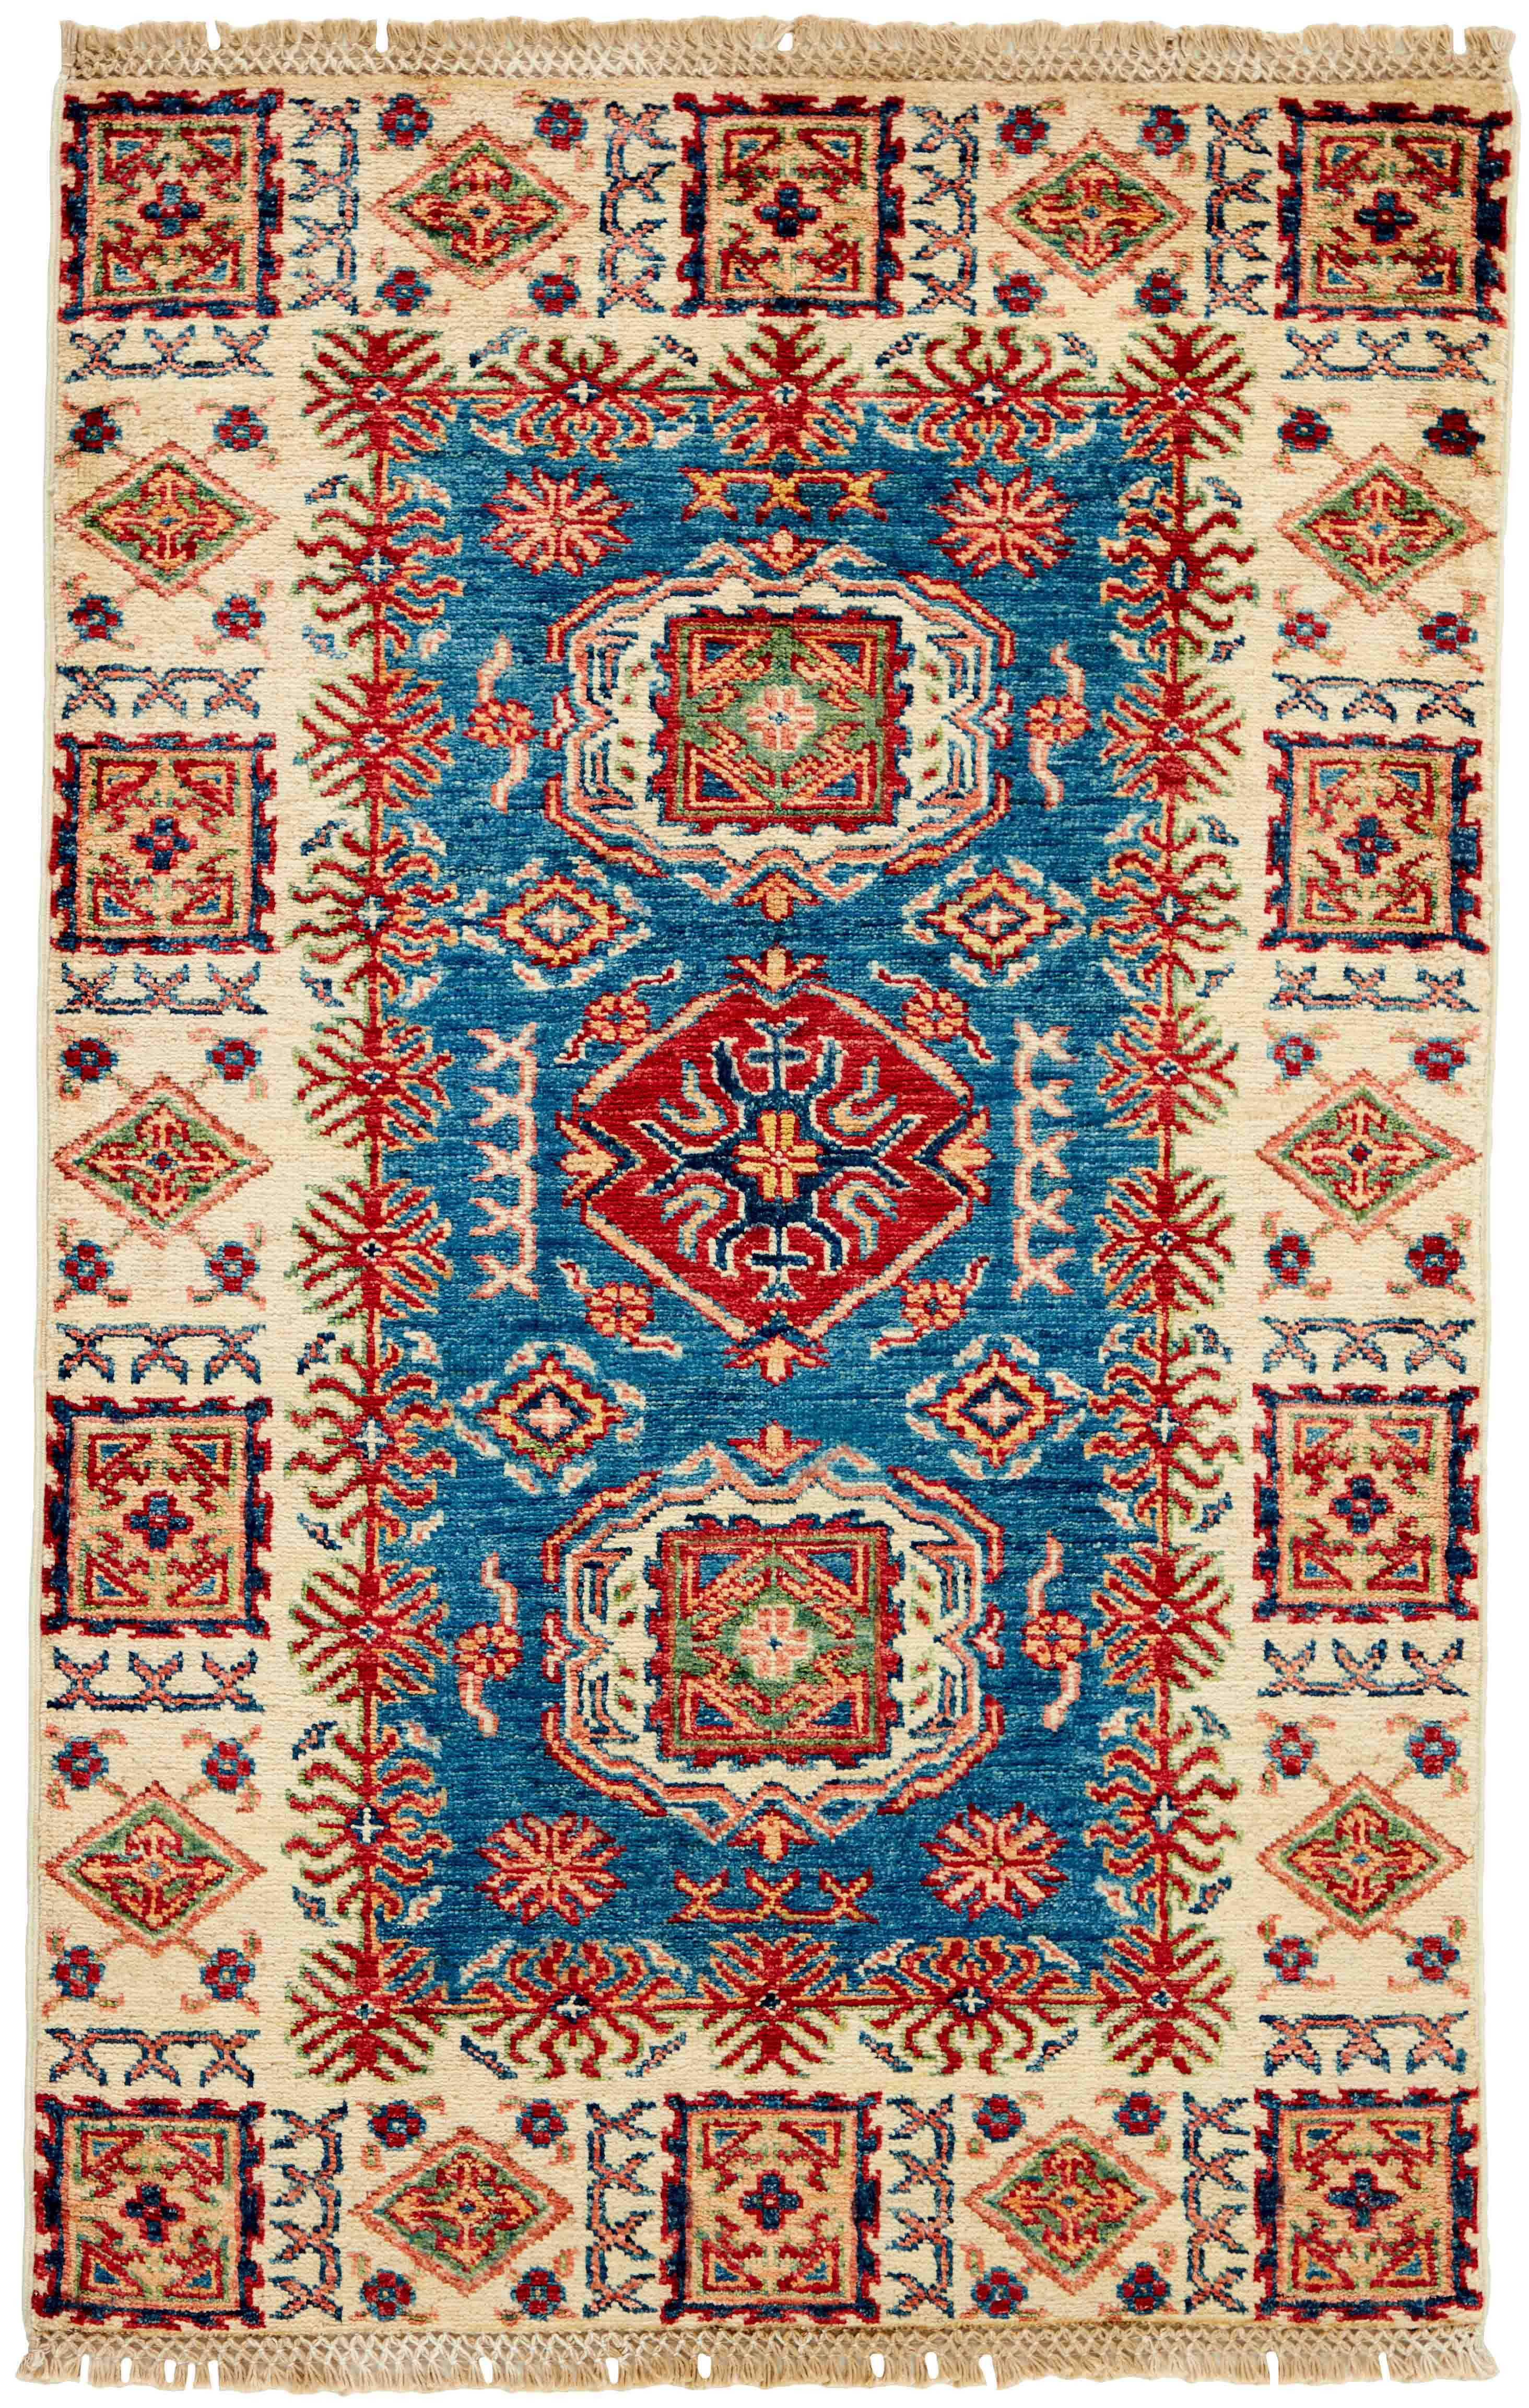 Authentic oriental rug with red, beige, yellow and blue traditional geometric design